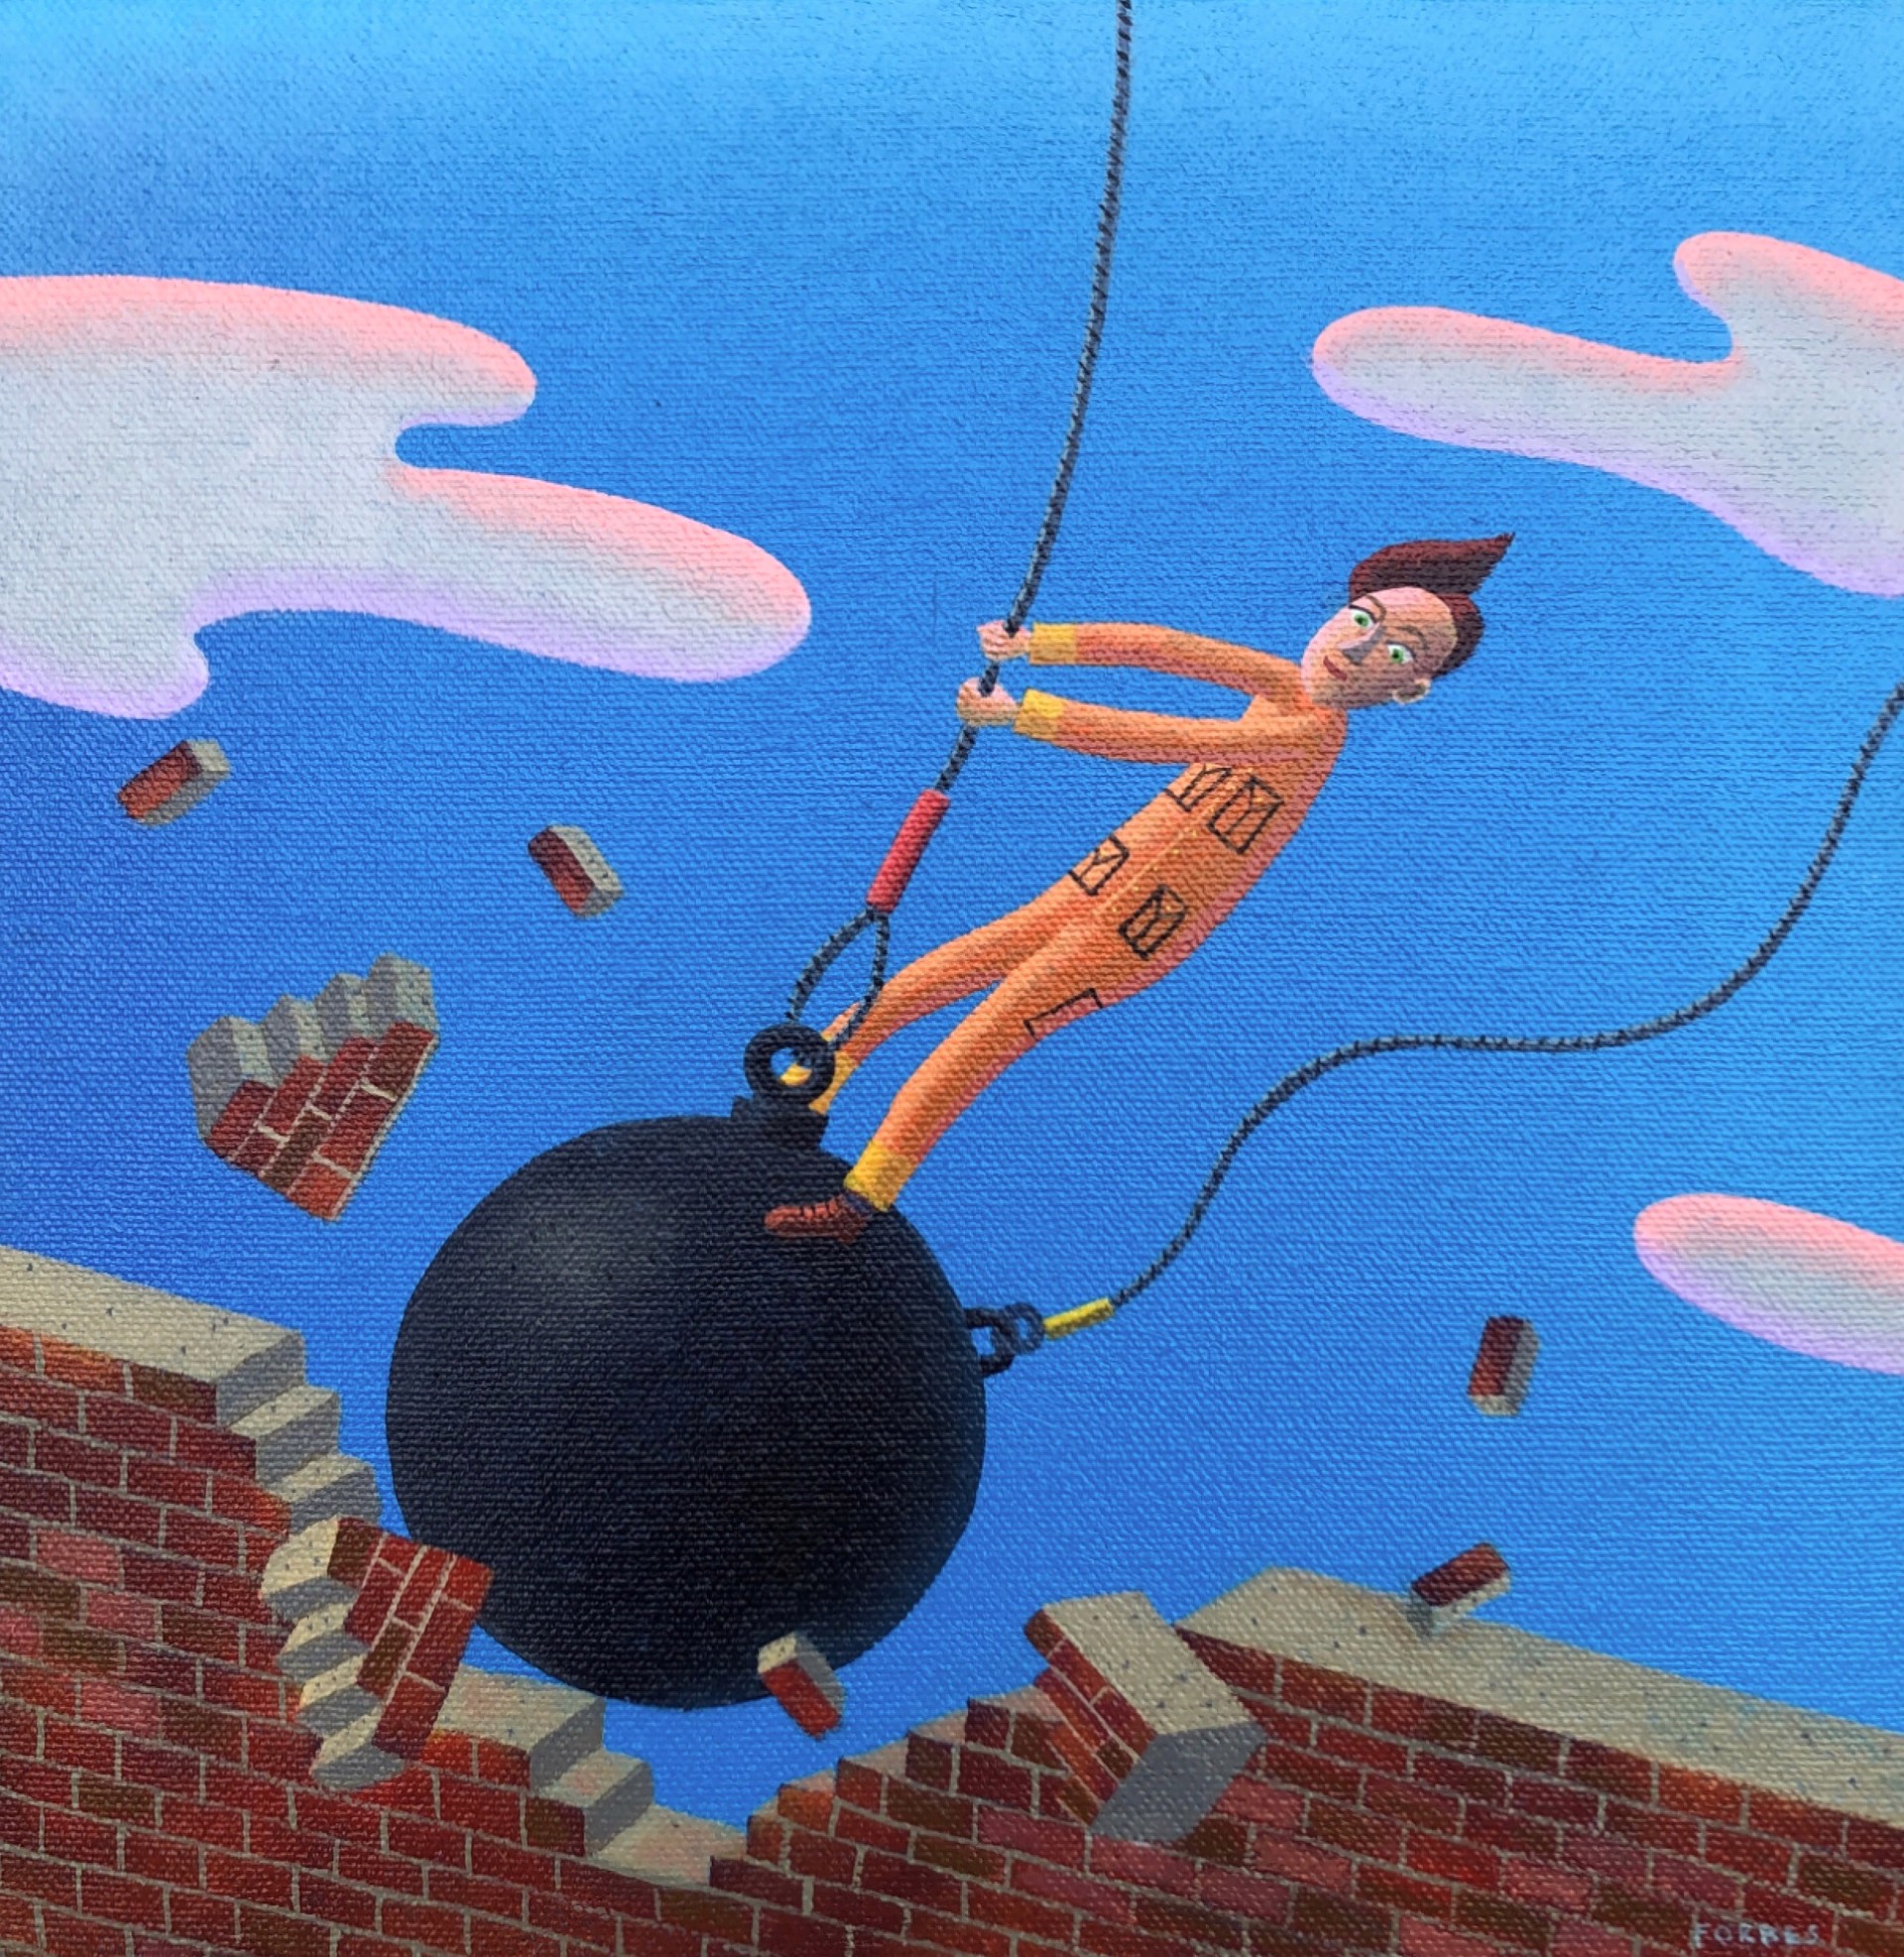 Take a Ride on a Wrecking Ball by Rodney Forbes